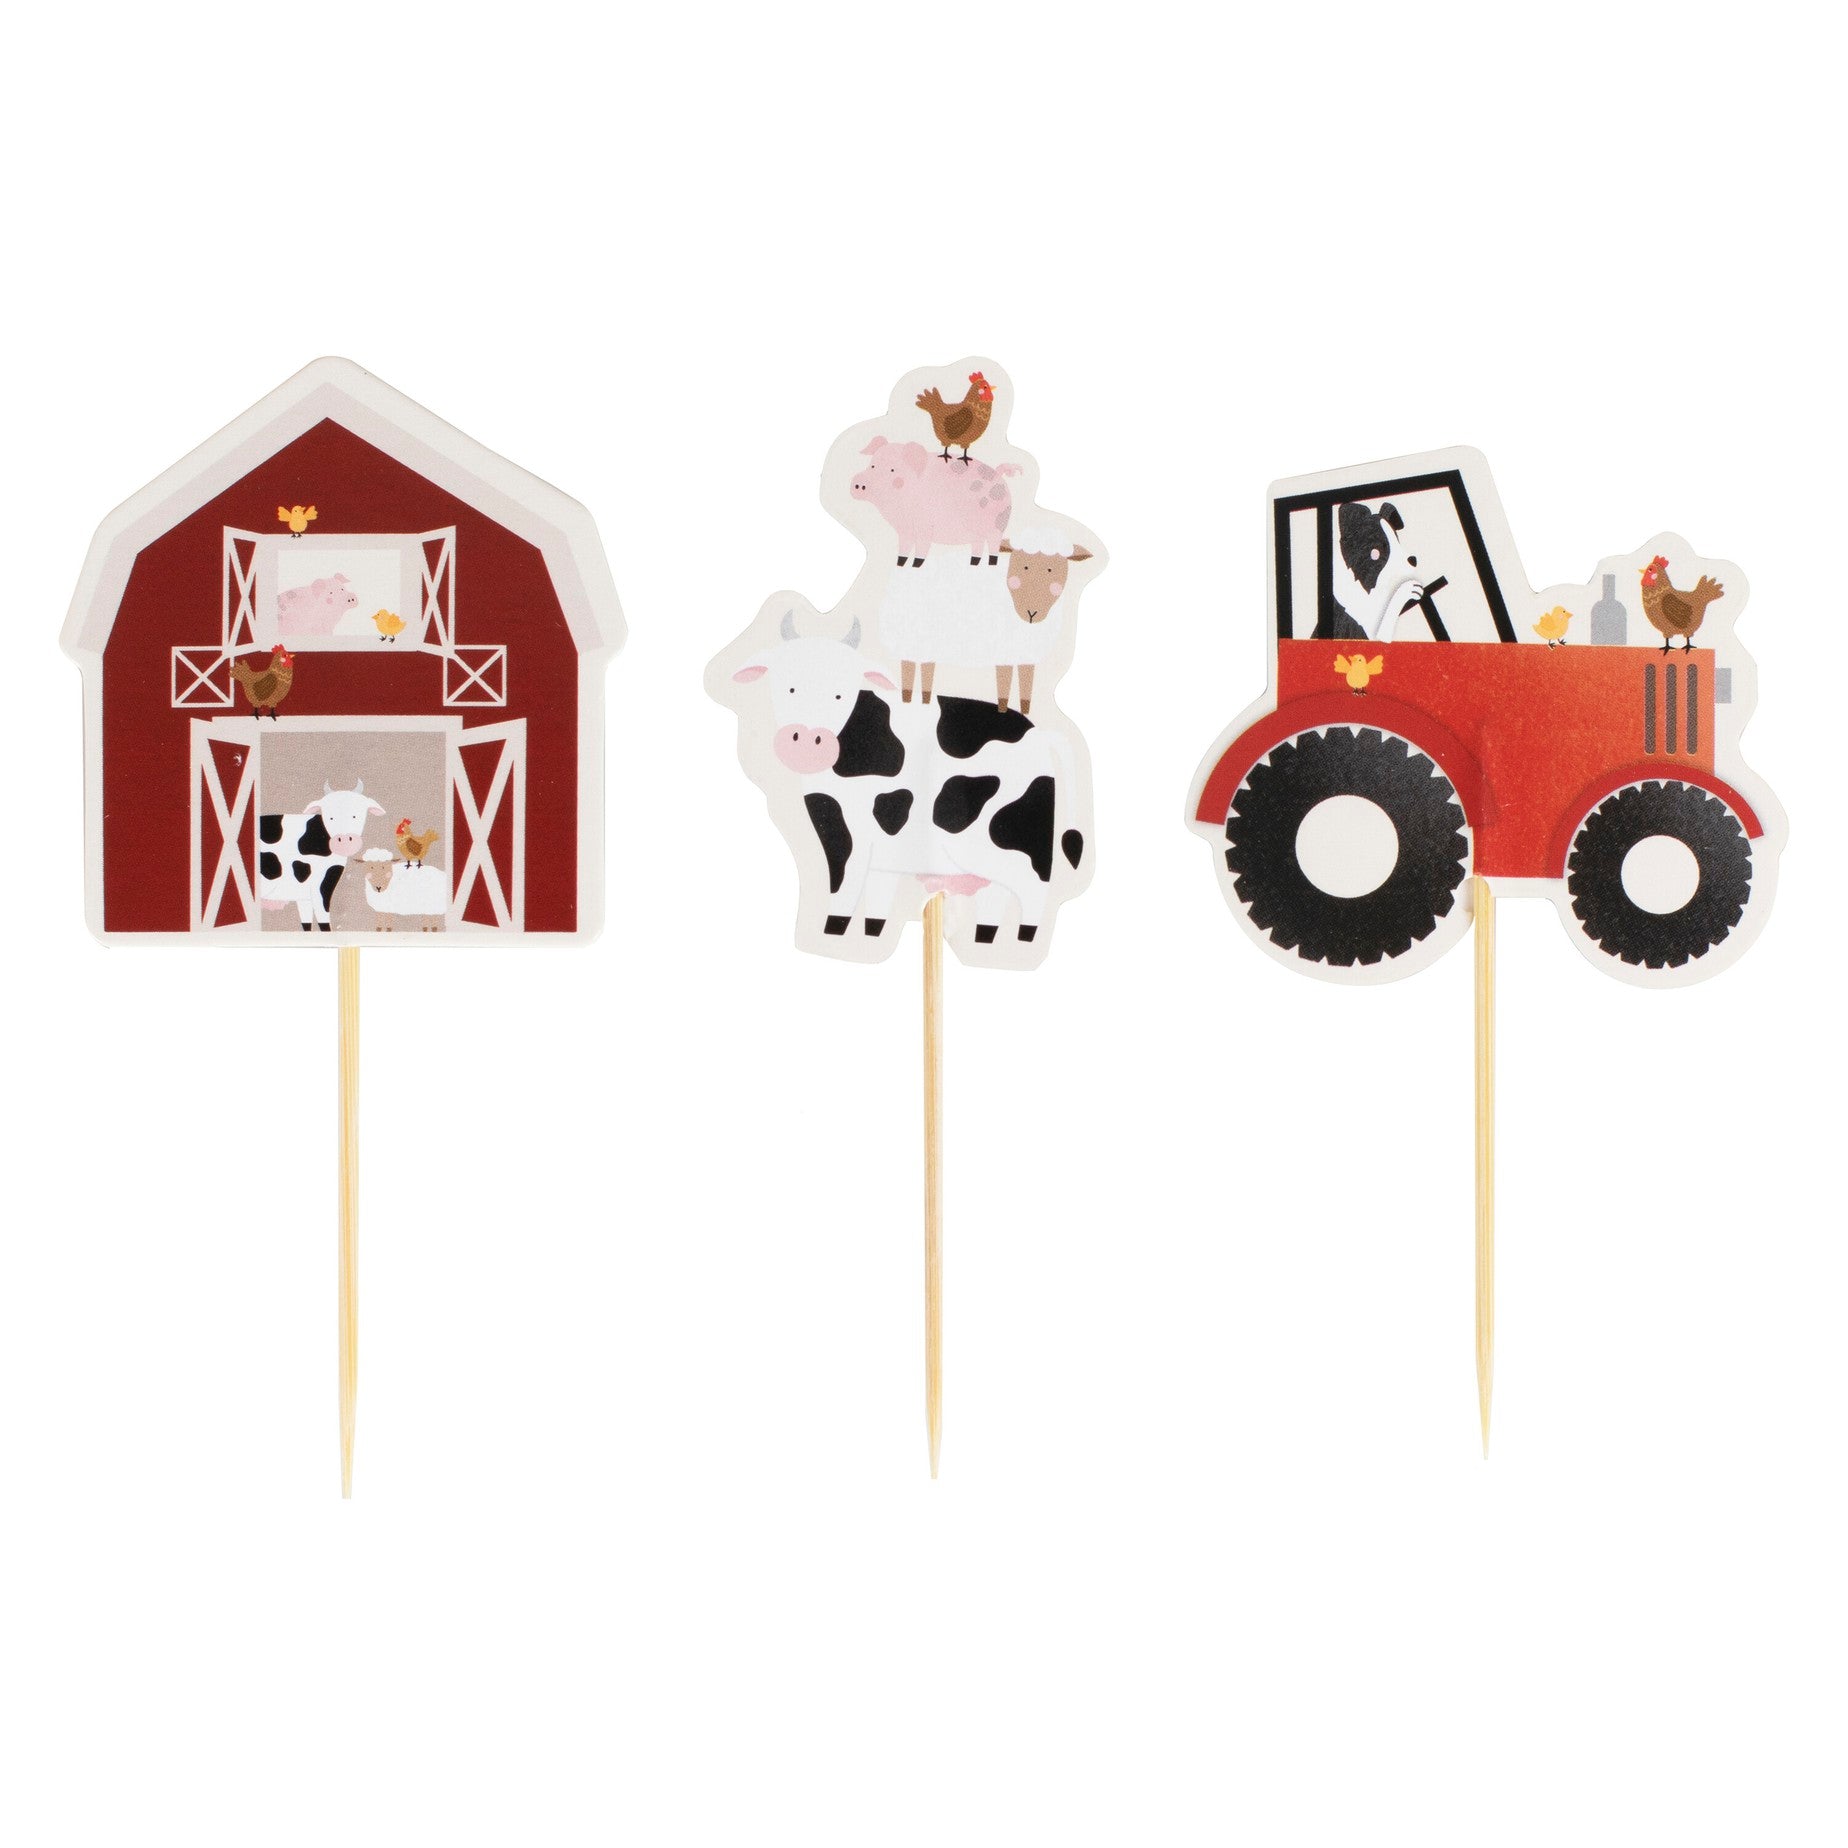 Cupcake toppers Ginger Ray - Farm Birthday, 12 kom